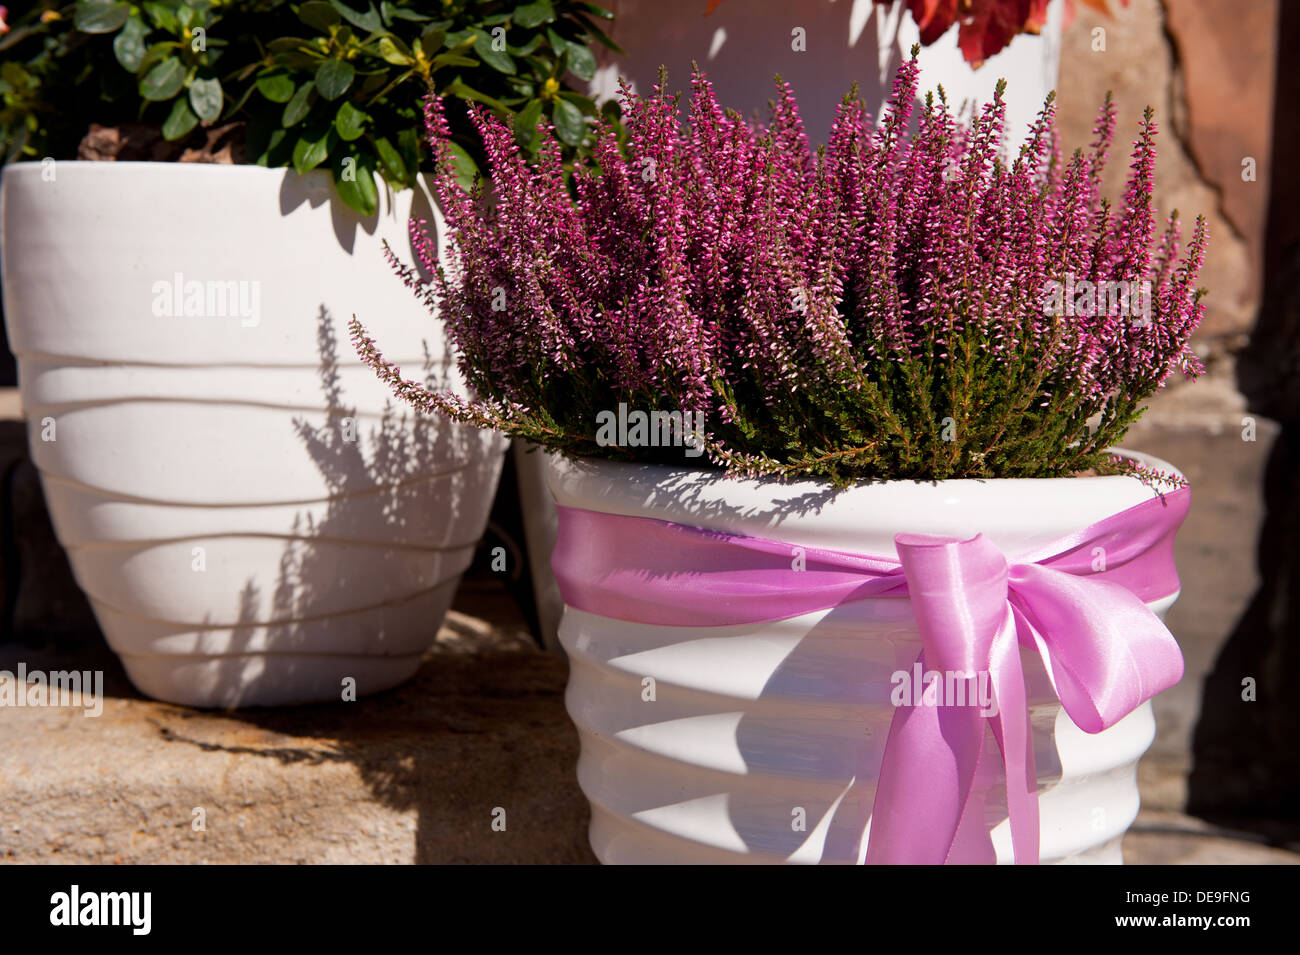 ling plant grow in white flowerpot with pink bow Stock Photo